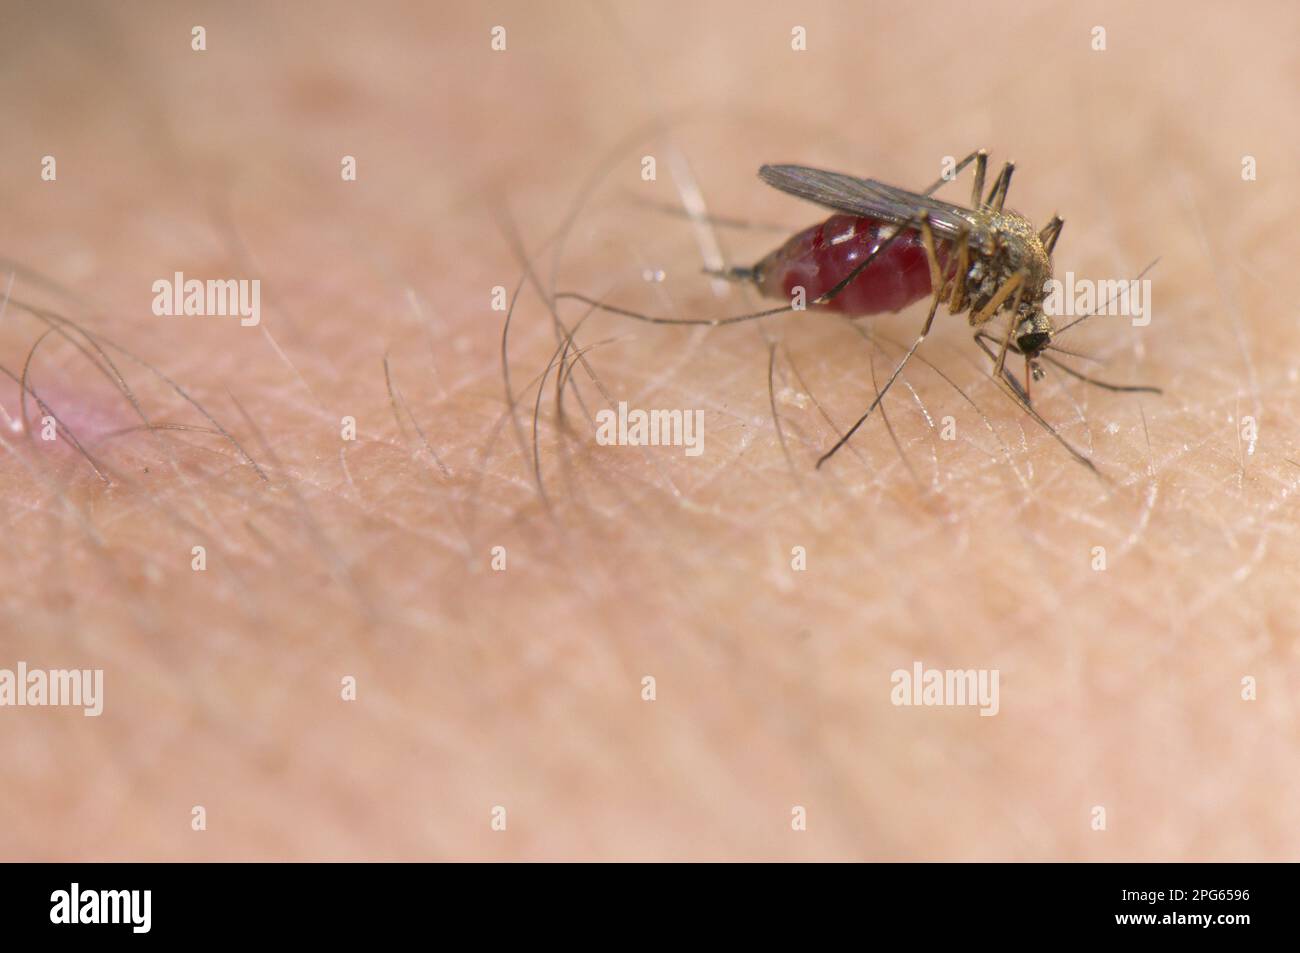 Common Mosquito, Northern House Mosquito, Common mosquitoes (Culicidae), Northern House Mosquitoes (Culex pipiens), Other Animals, Insects, Animals Stock Photo